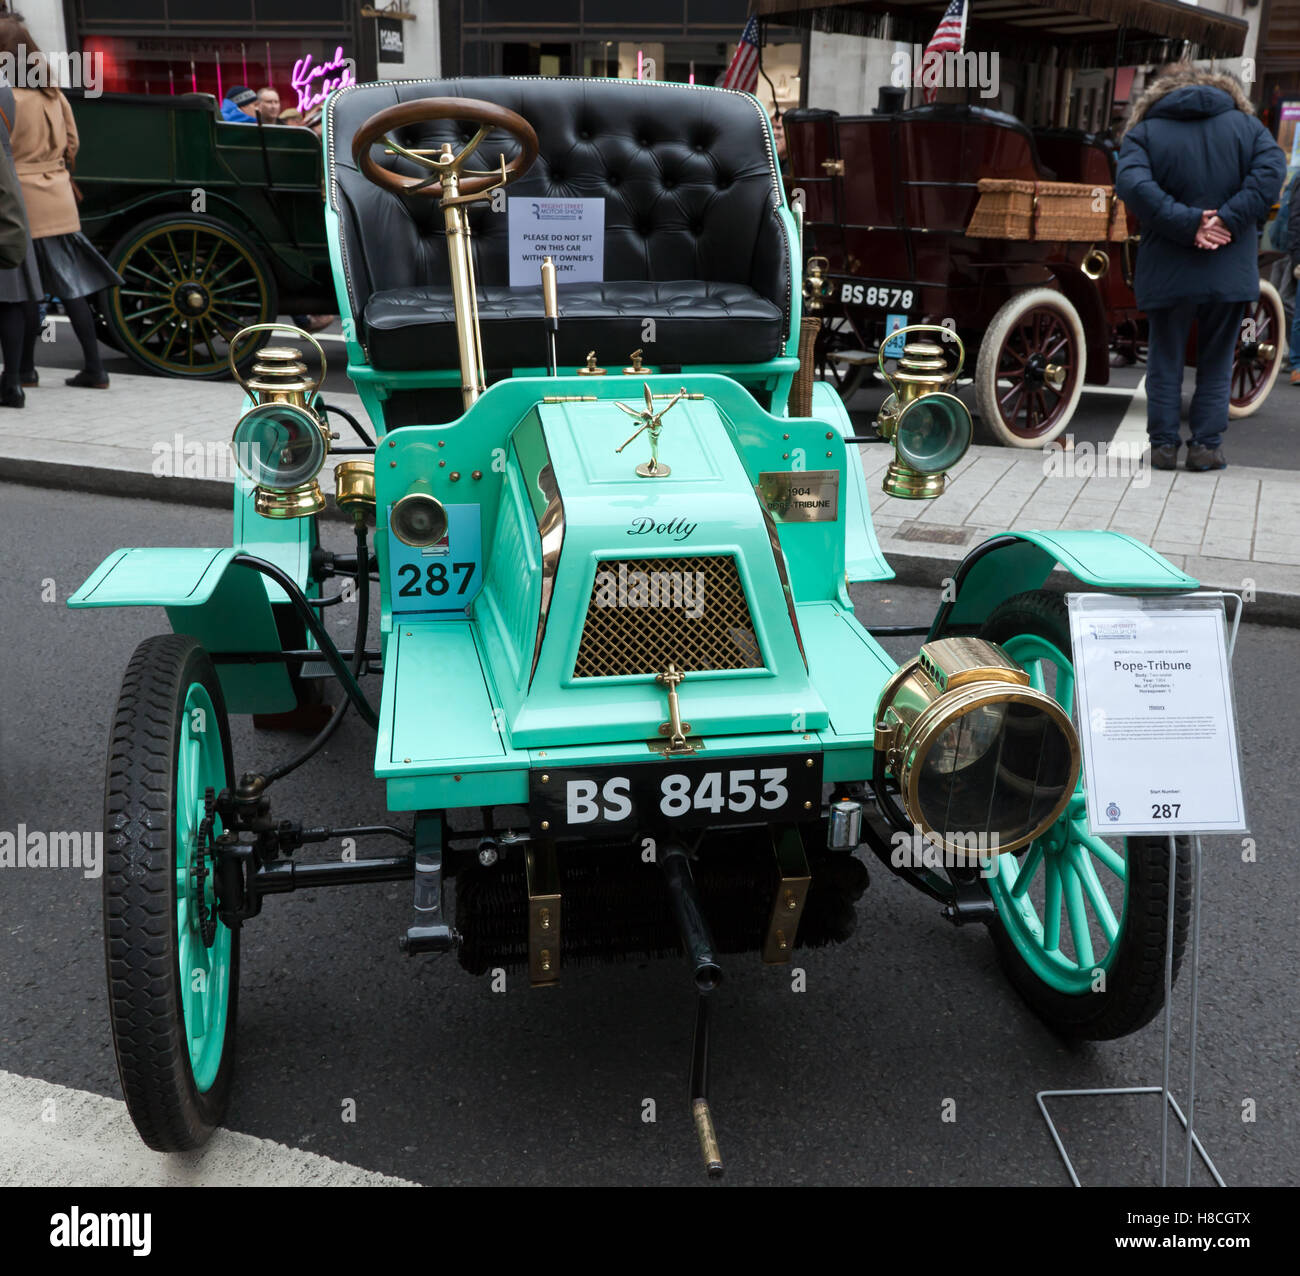 Image of a Two-seater, 1904 Pope-Tribune veteran car, taking part in the Concours d'Elegance, at Regents Street, London. Stock Photo